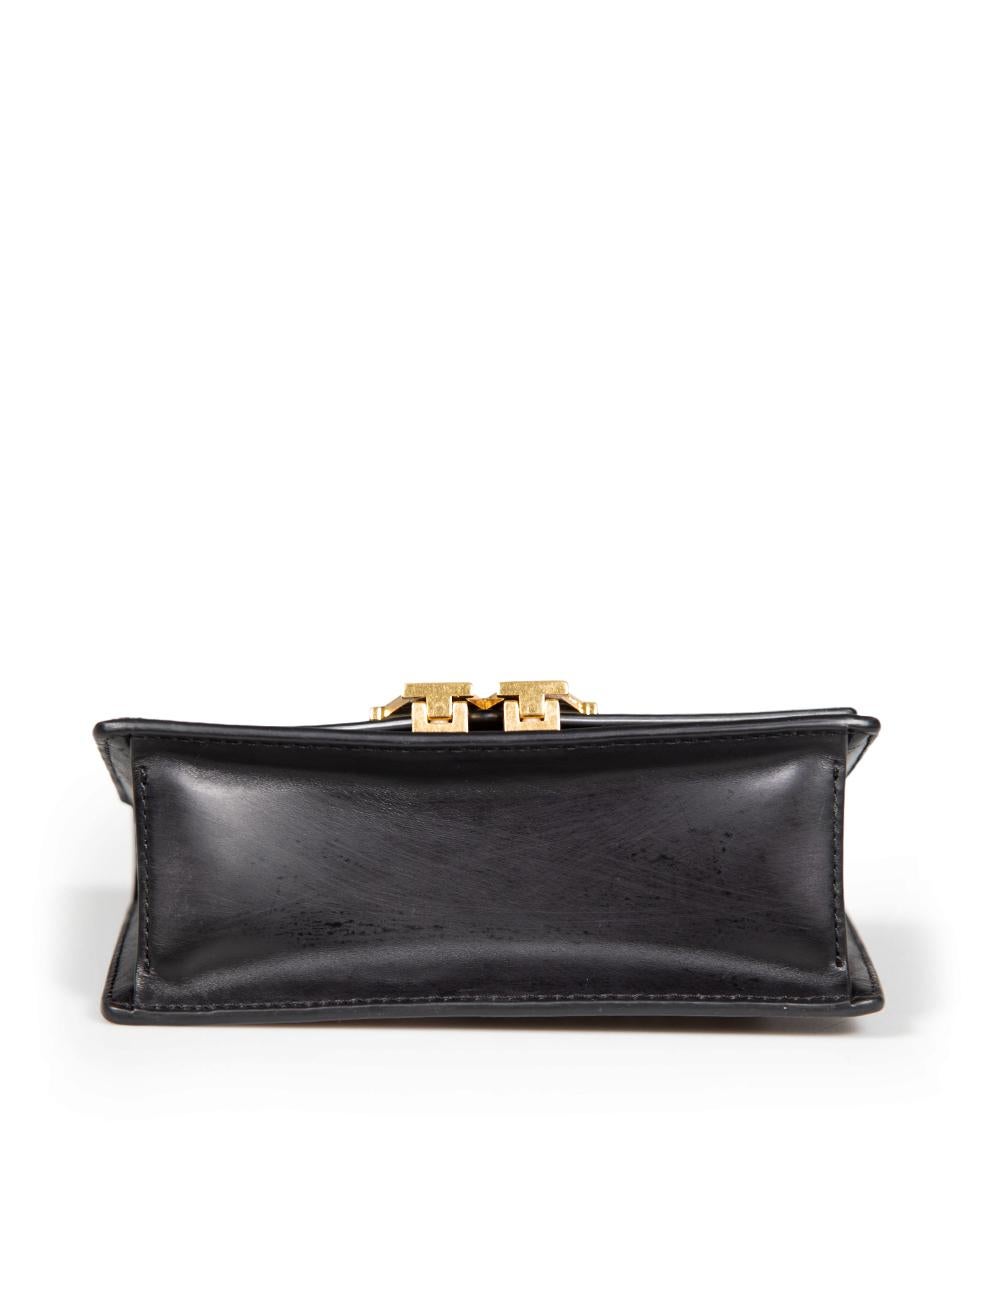 Women's Alexander Wang Black Leather Small Legacy Bag For Sale